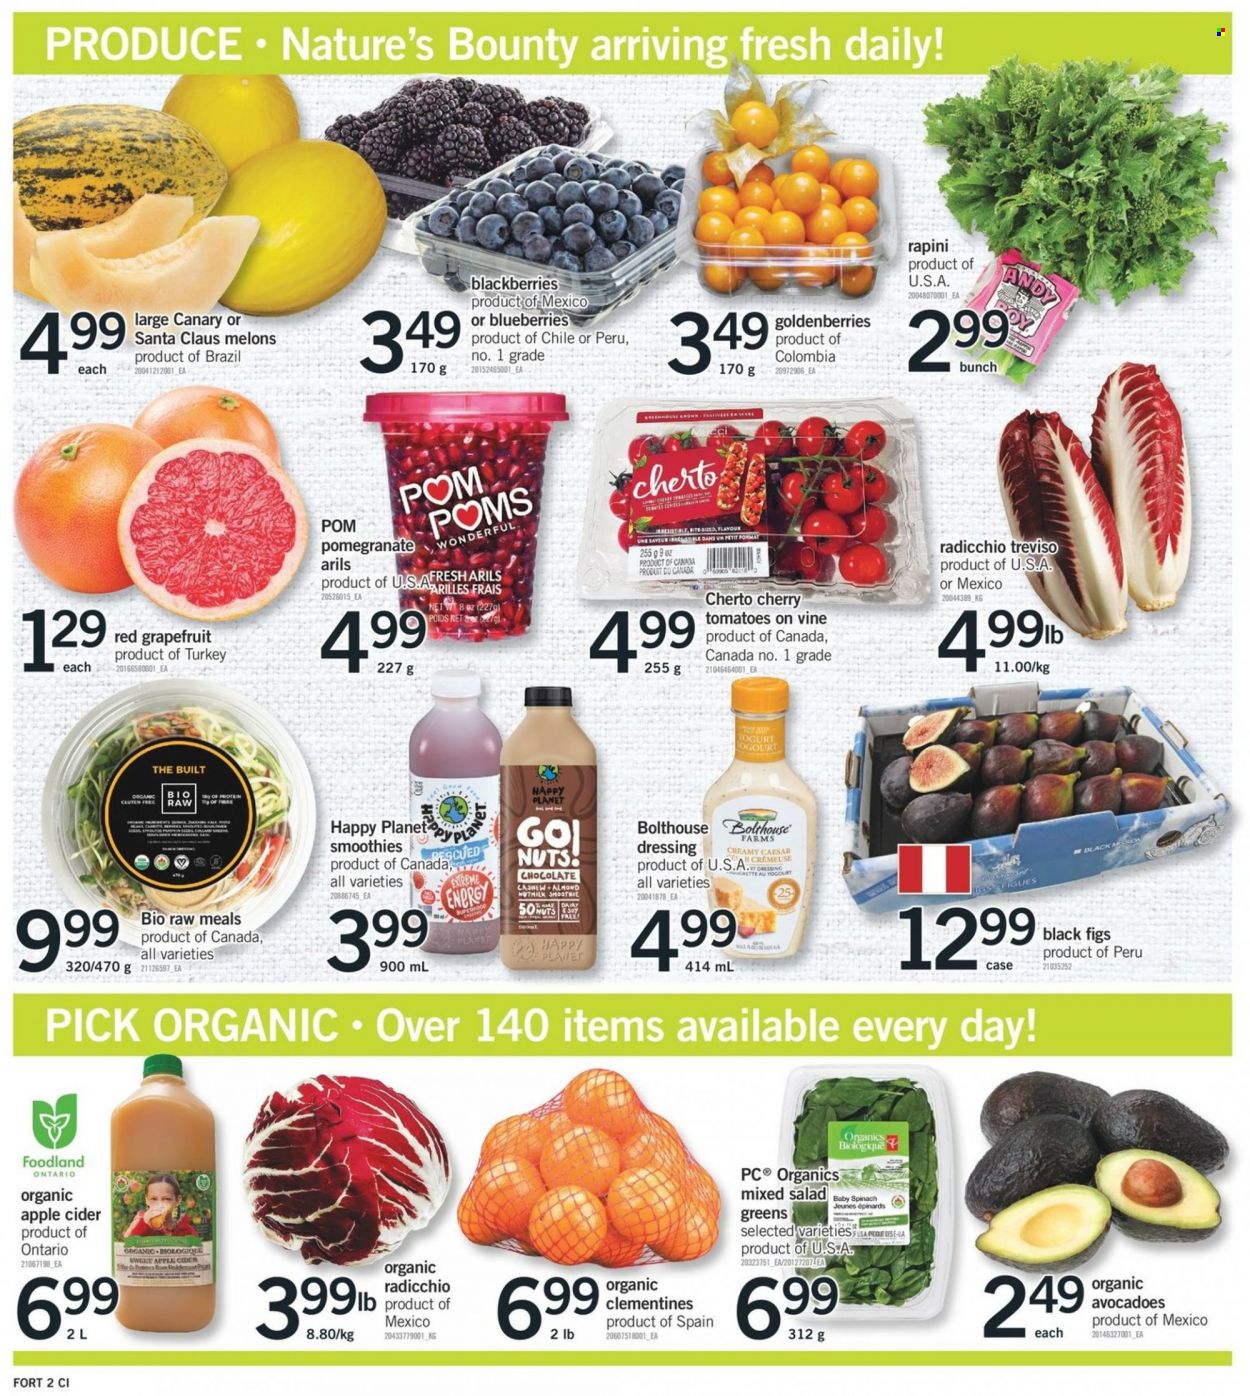 thumbnail - Fortinos Flyer - January 13, 2022 - January 19, 2022 - Sales products - spinach, tomatoes, salad, blackberries, blueberries, clementines, figs, grapefruits, melons, pomegranate, chocolate, Santa, dressing, smoothie, apple cider, cider, Santa Claus, Pom Poms, Nature's Bounty, radicchio. Page 3.